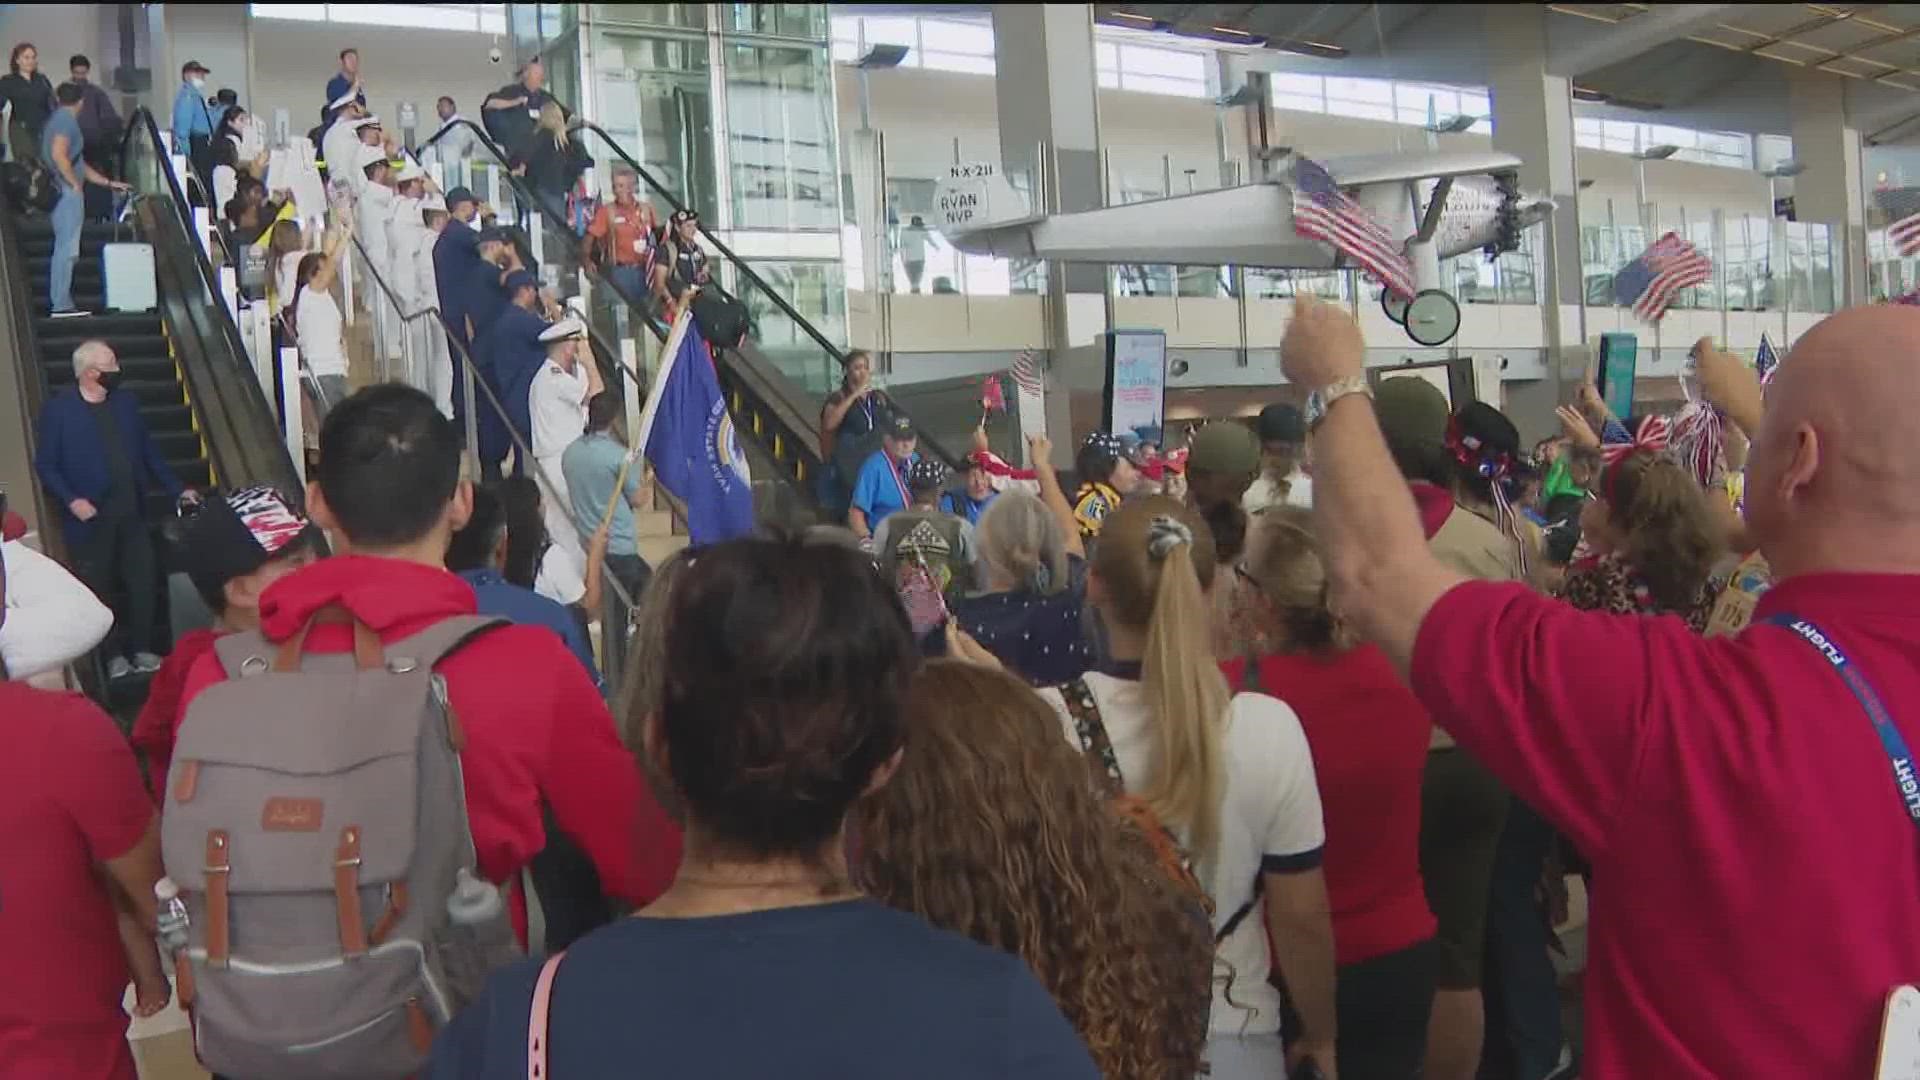 Nearly 1,000 people lined up at San Diego International Airport to welcome Honor Flight back from Washington D.C.